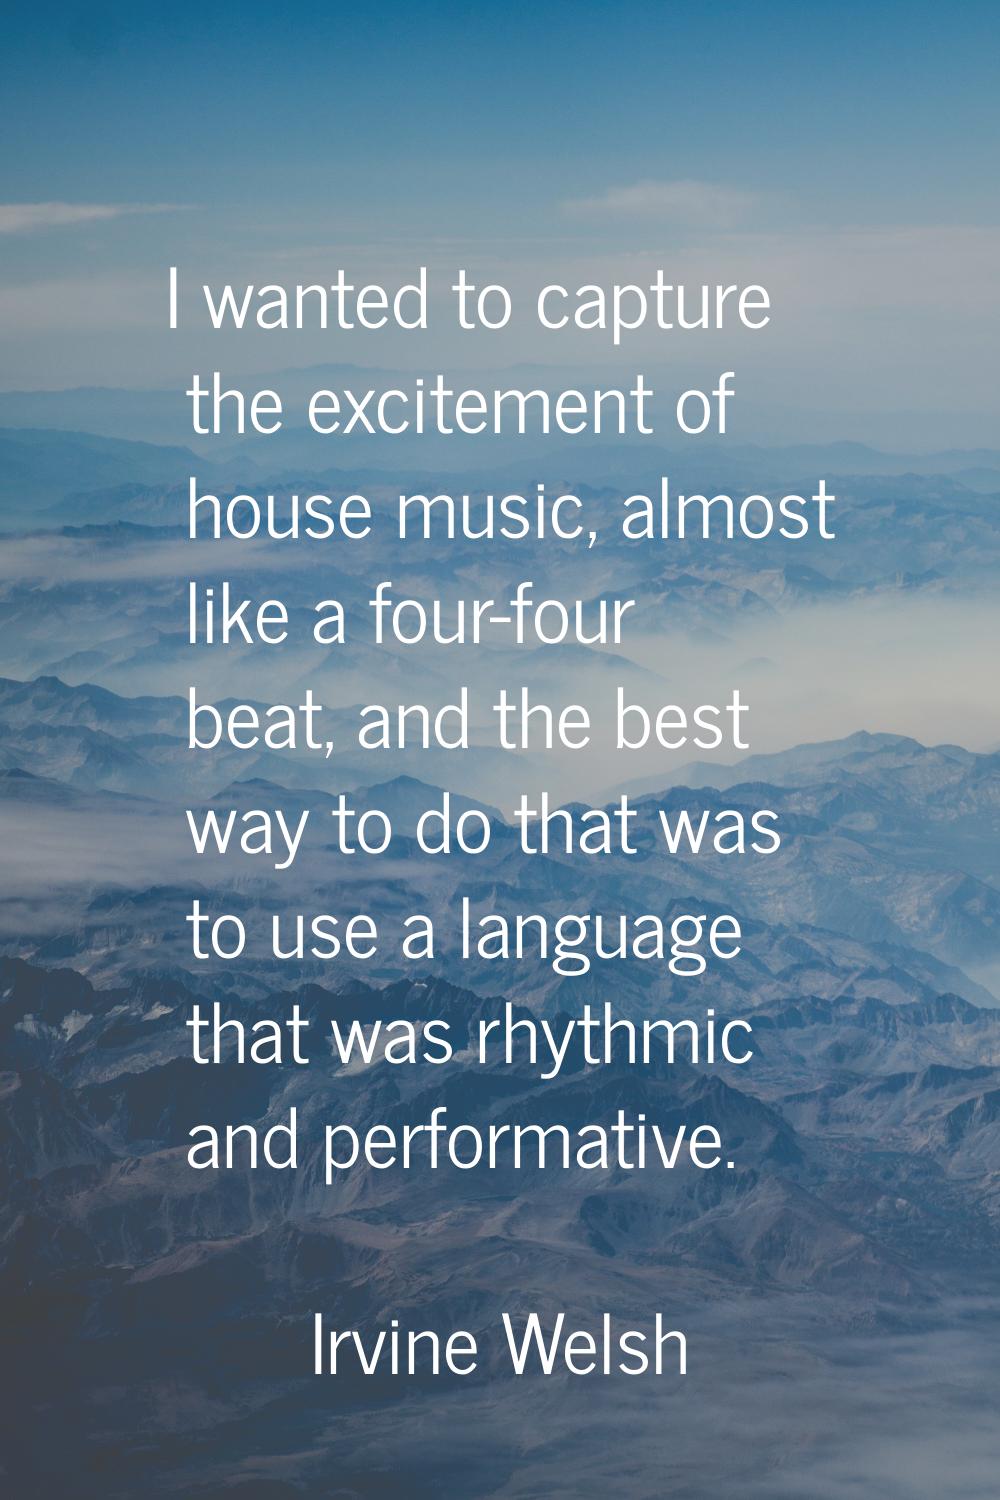 I wanted to capture the excitement of house music, almost like a four-four beat, and the best way t